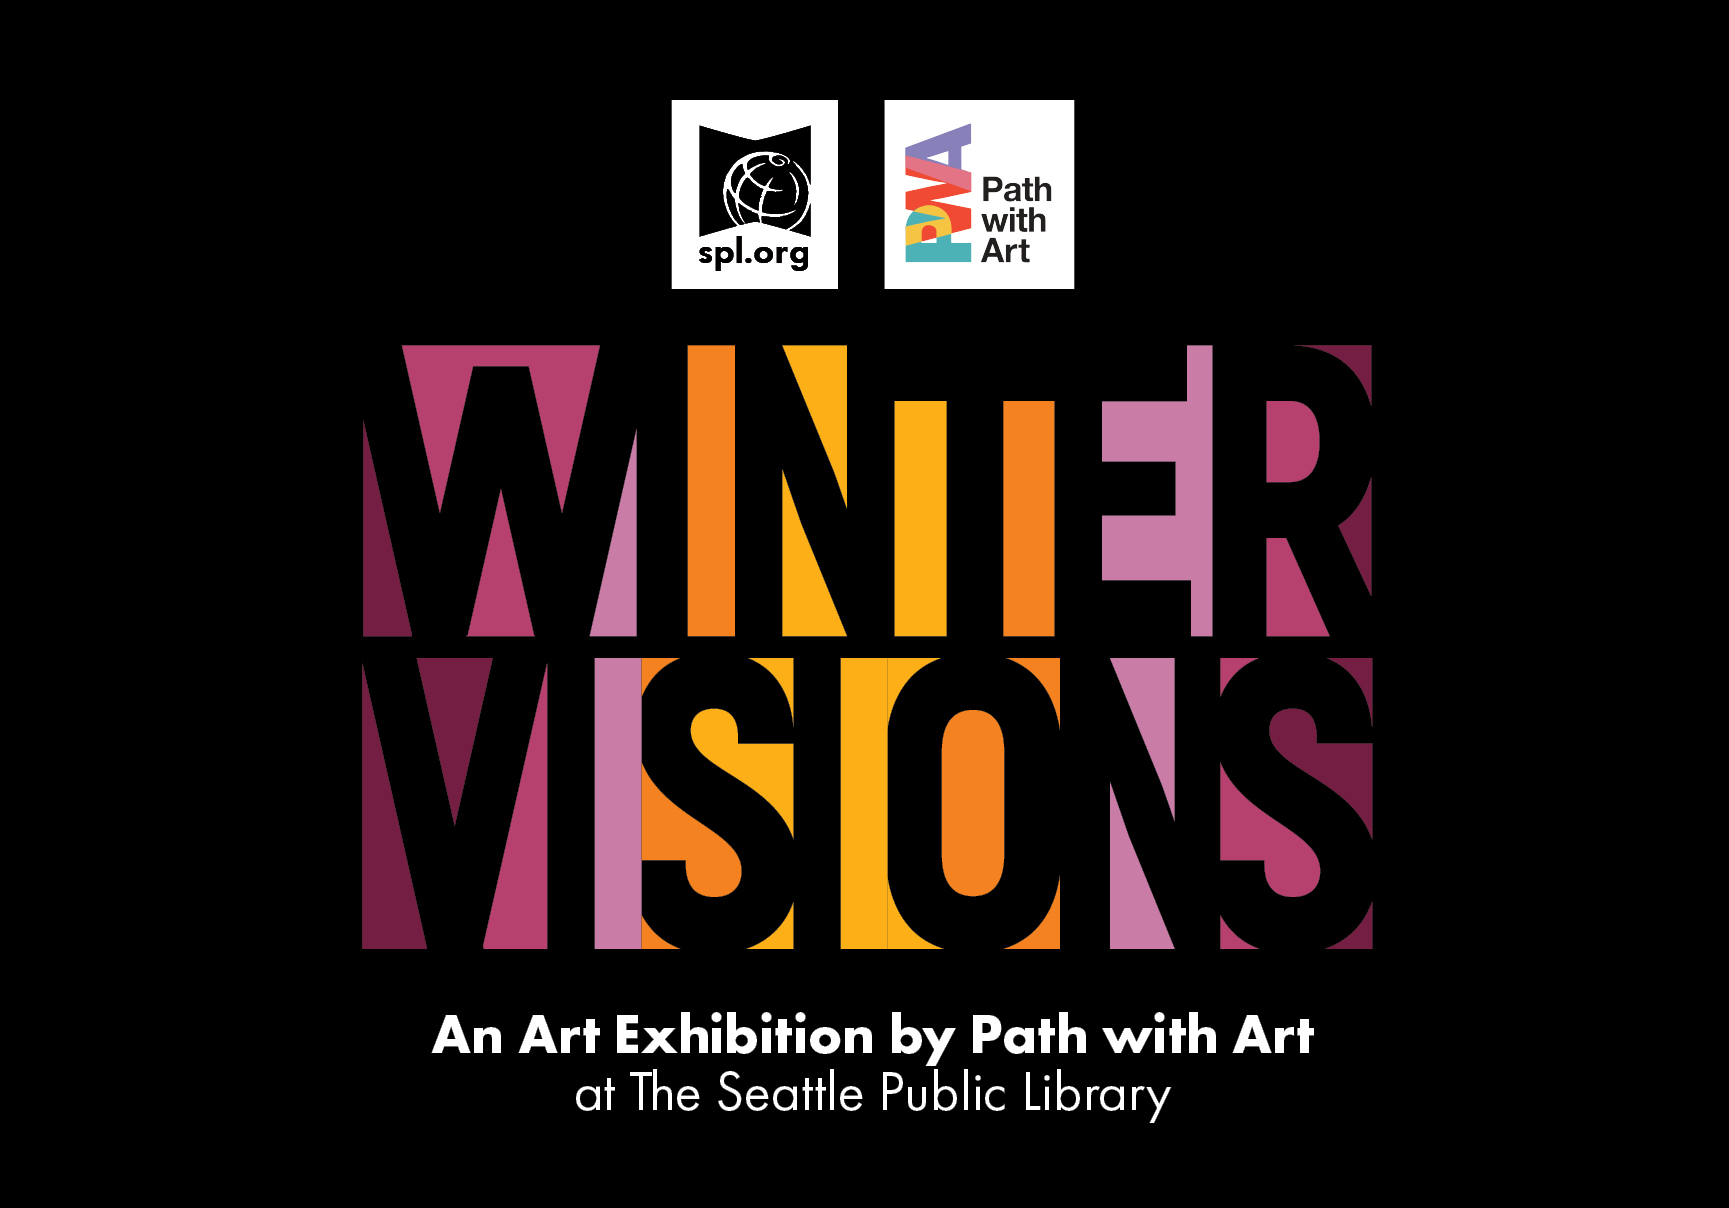 Winter Visions: An Art Exhibition by Path with Art at The Seattle Public Library